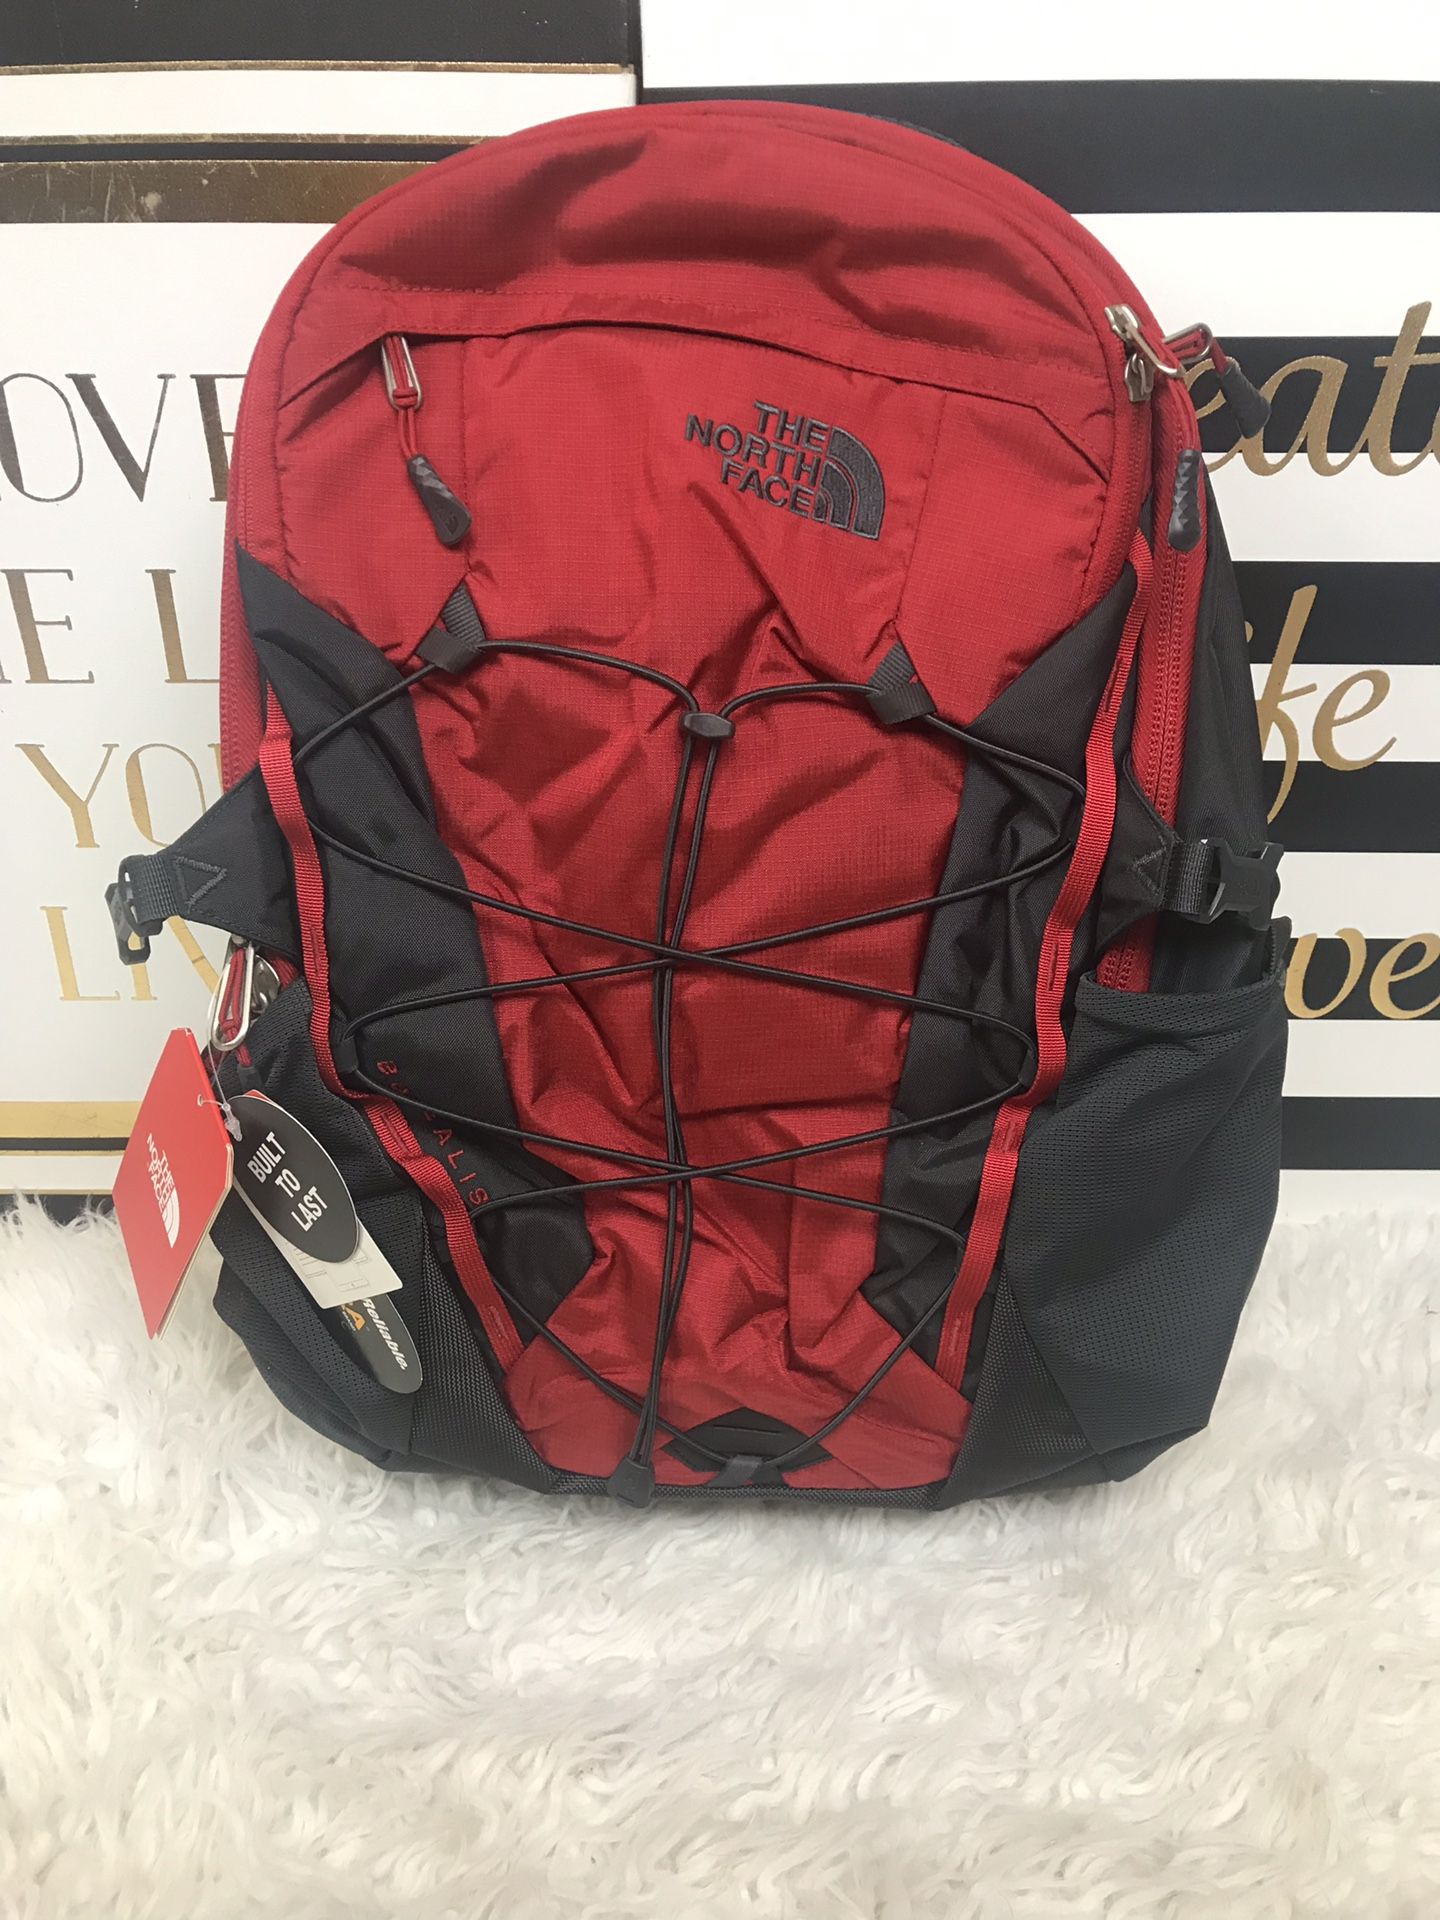 New The NorthFace Backpack